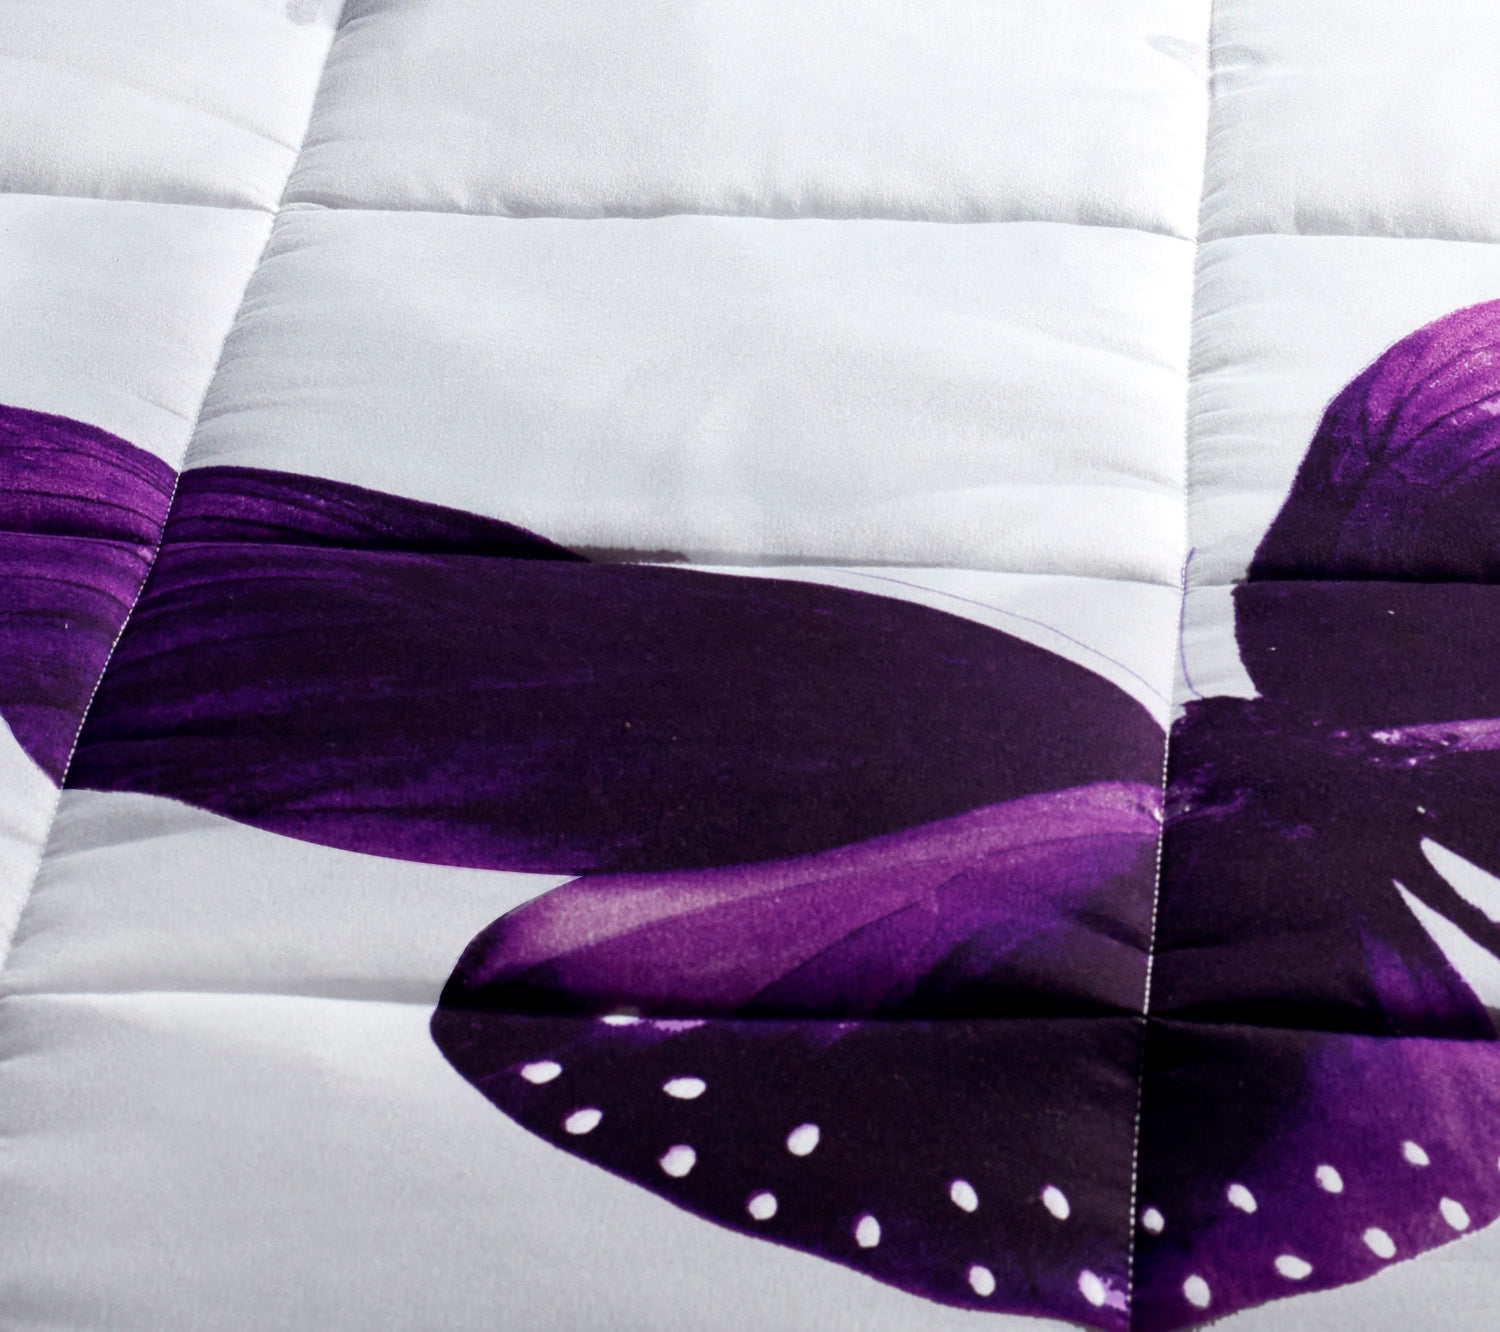 BUTTERFLY ALTERNATIVE DOWN 3PC PRINTED COMFORTER. PERFECT FOR ANY SEASON. ULTRA SOFT MICROFIBER COVER